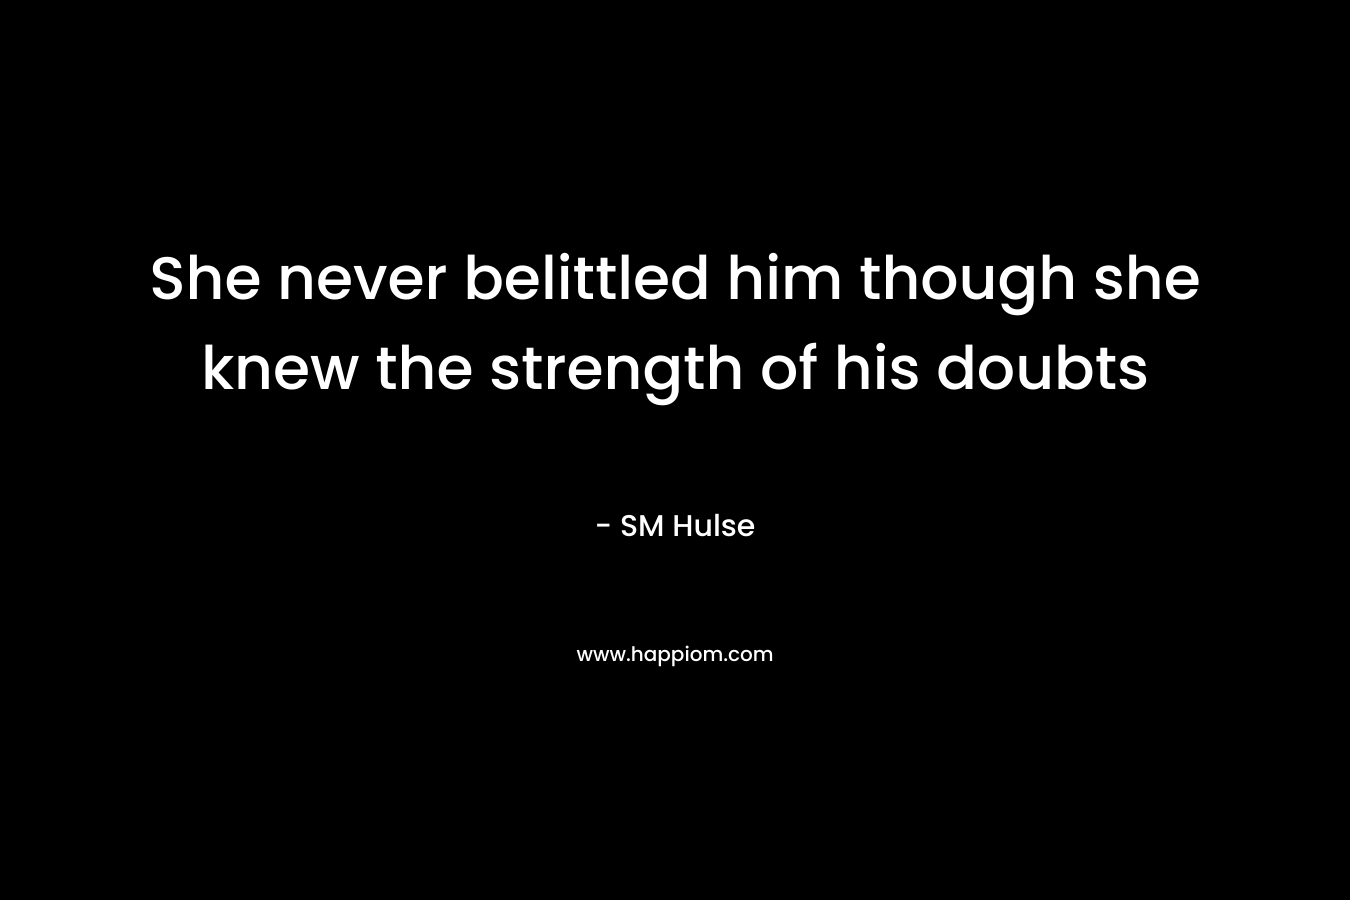 She never belittled him though she knew the strength of his doubts – SM Hulse